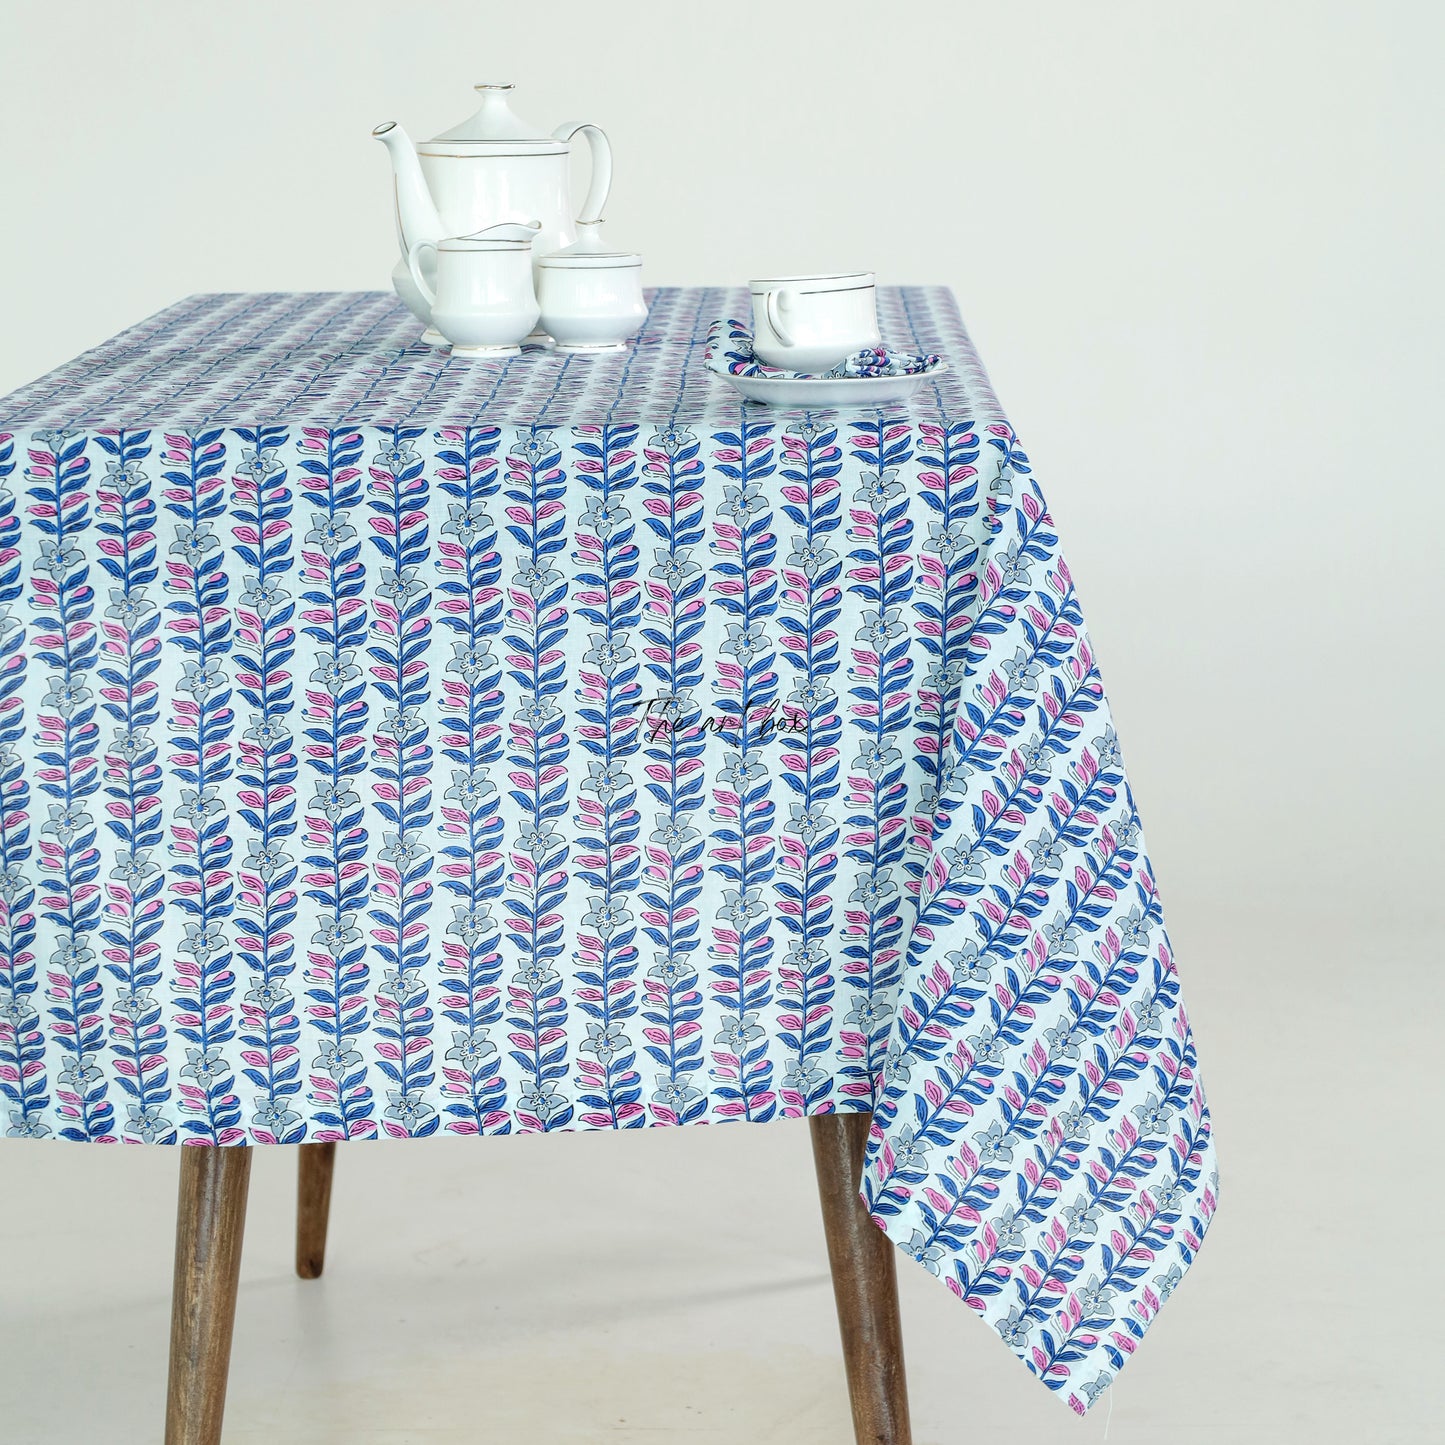 Blossom Elegance  Floral Cotton Printed Table Cover